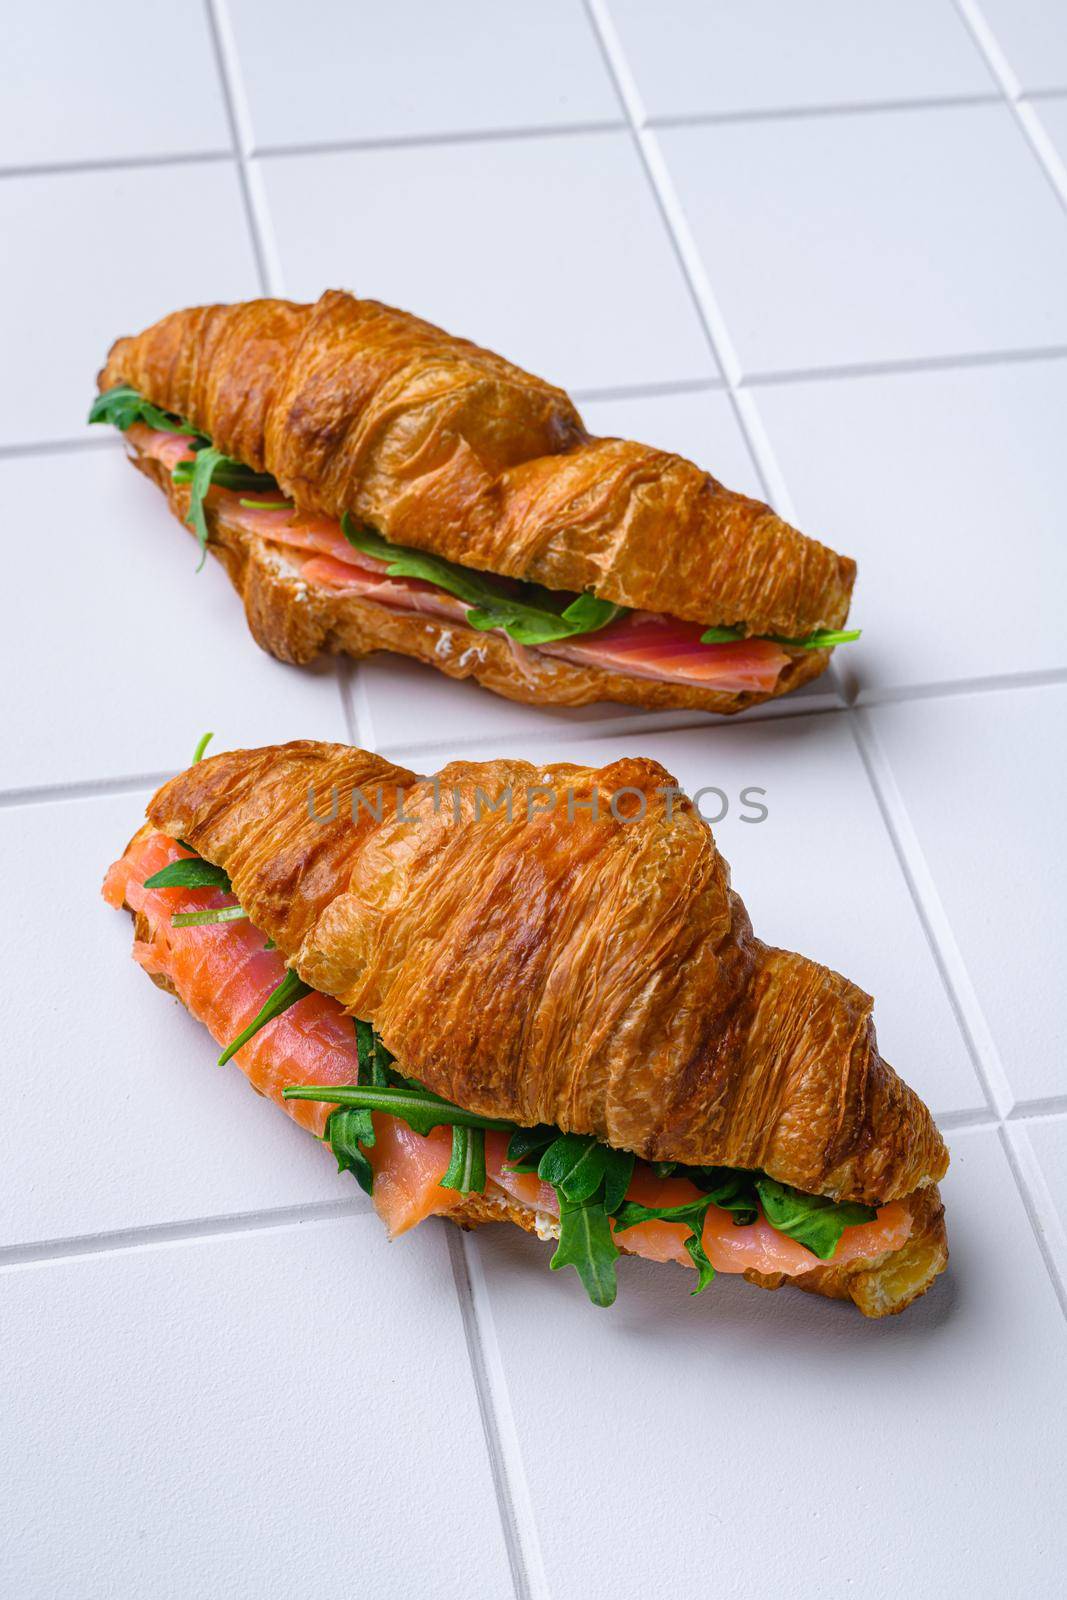 Croissant with salmon and cream cheese, on white ceramic squared tile table background by Ilianesolenyi